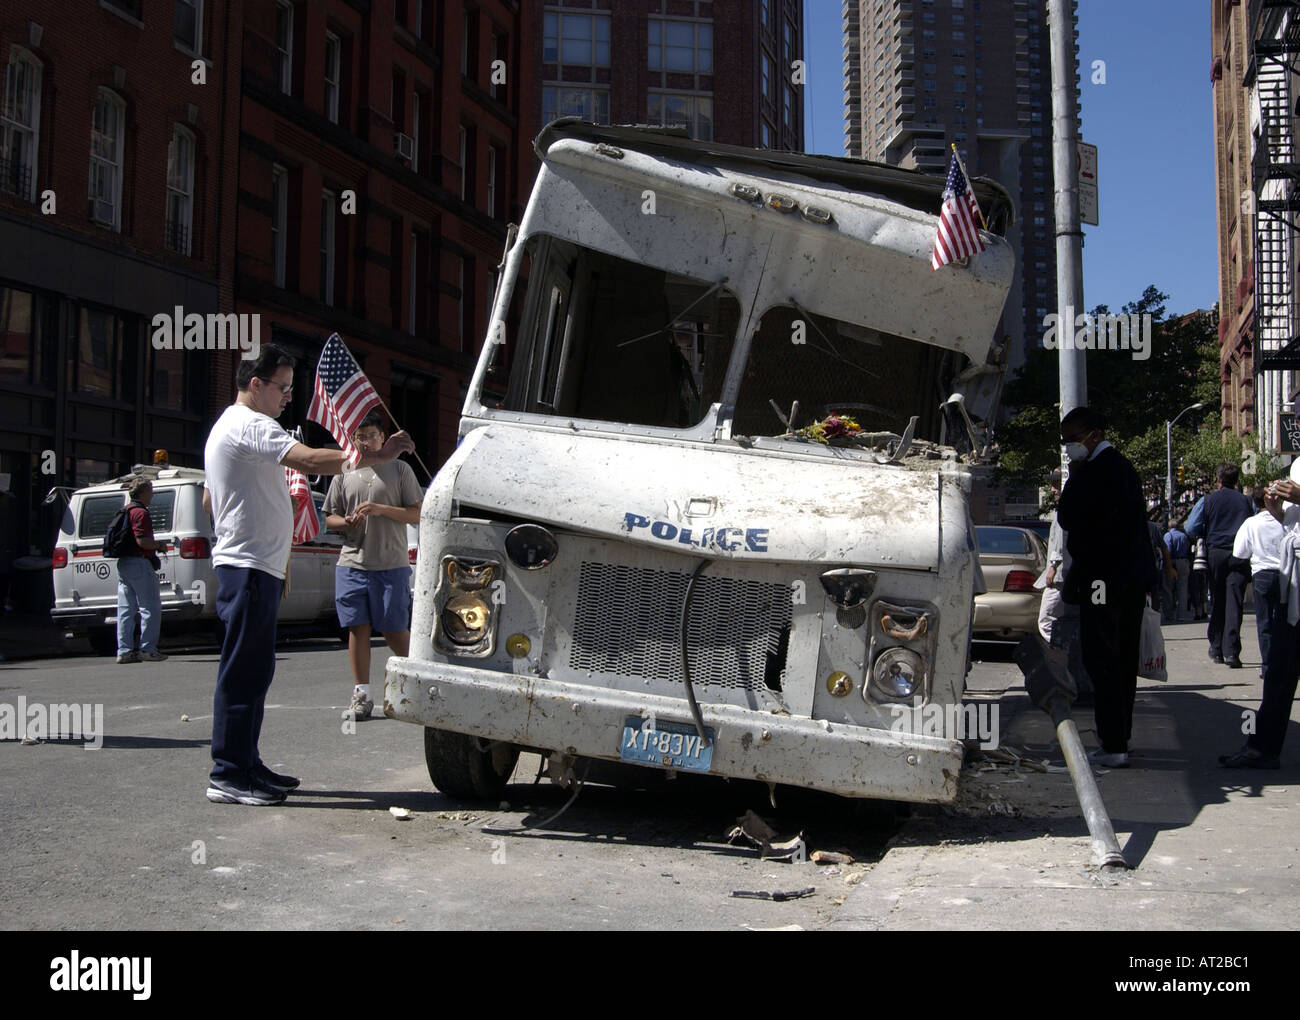 A man places a flag on a crushed police vehicle two days after 9 11 in New York City near ground zero Stock Photo